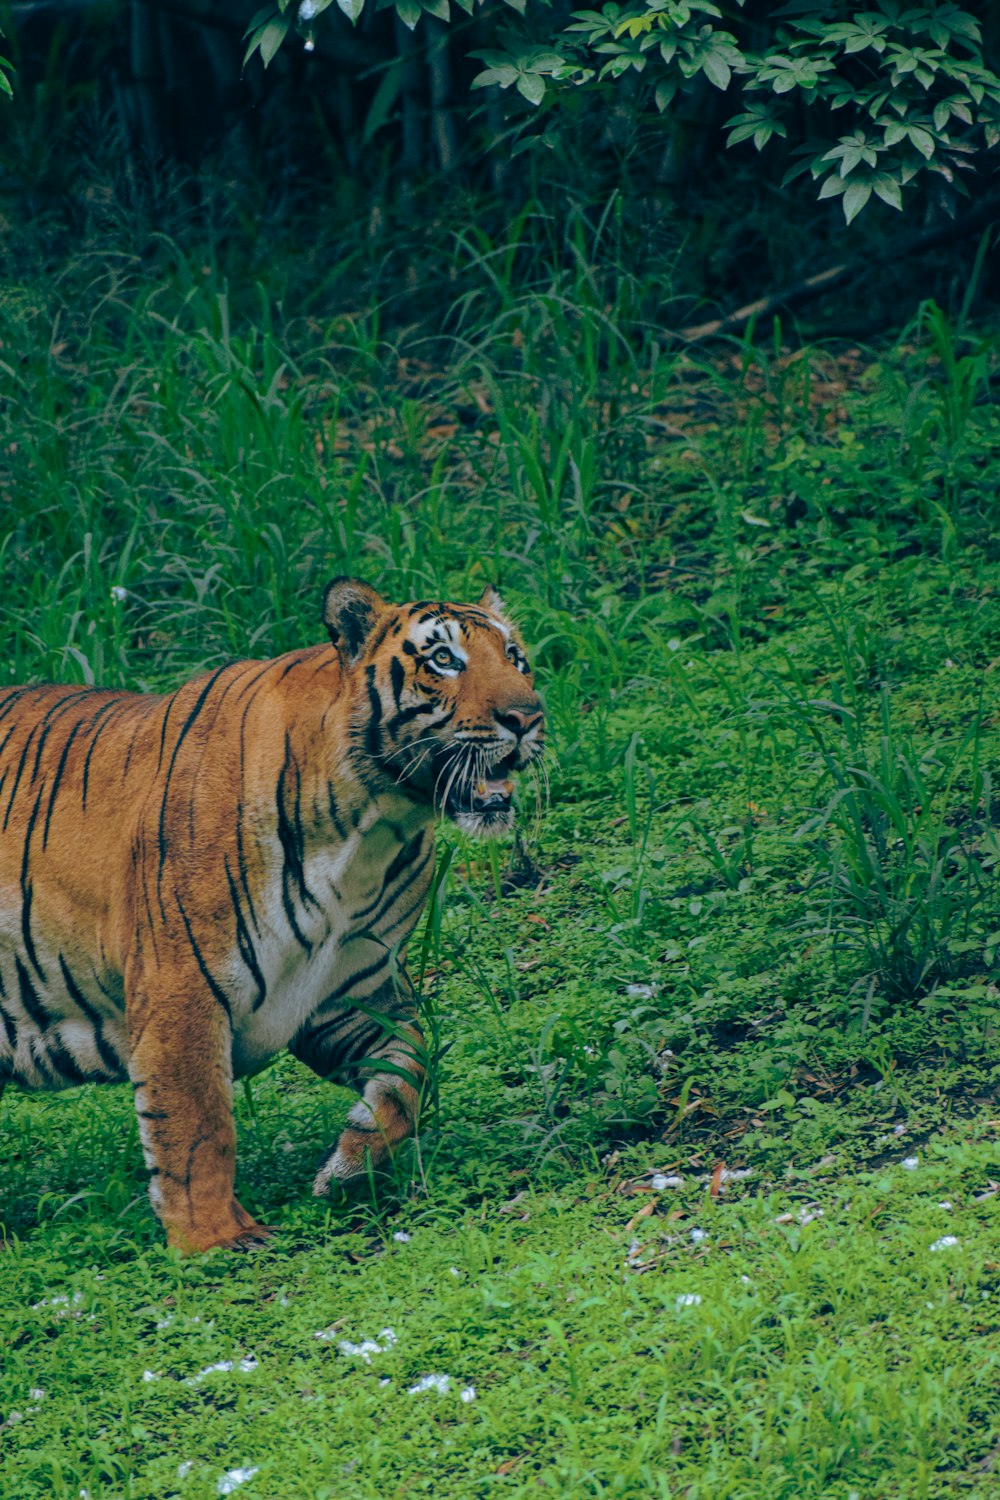 a tiger walking in the grass